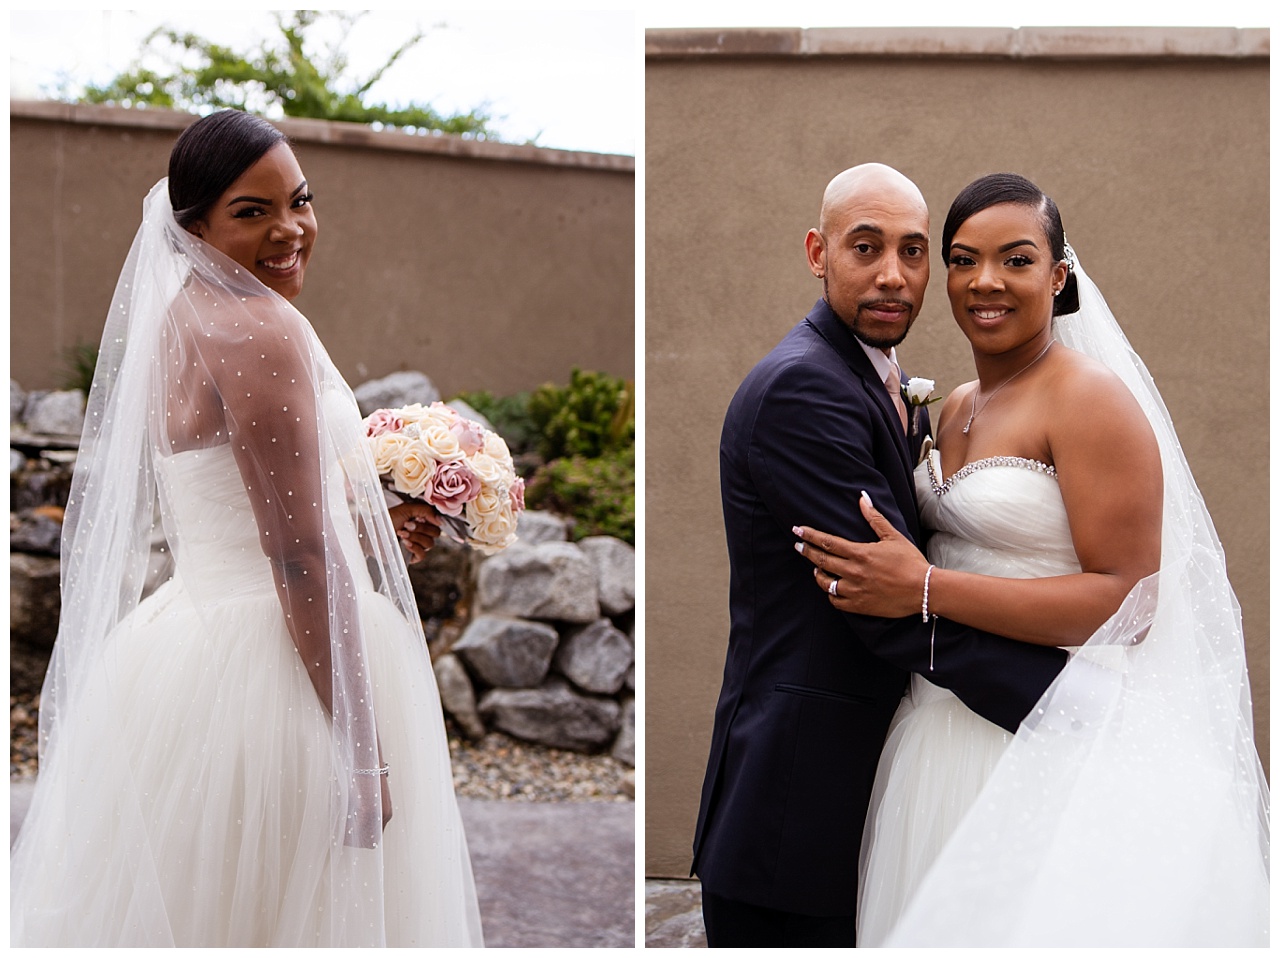  I may or may not have been completely obsessed with Tasha’s veil. Seriously, cathedral lengths, light weight, AND those gorgeous rhinestones EVERYWHERE, it was amazing and I loved the way it looked against her skin. 